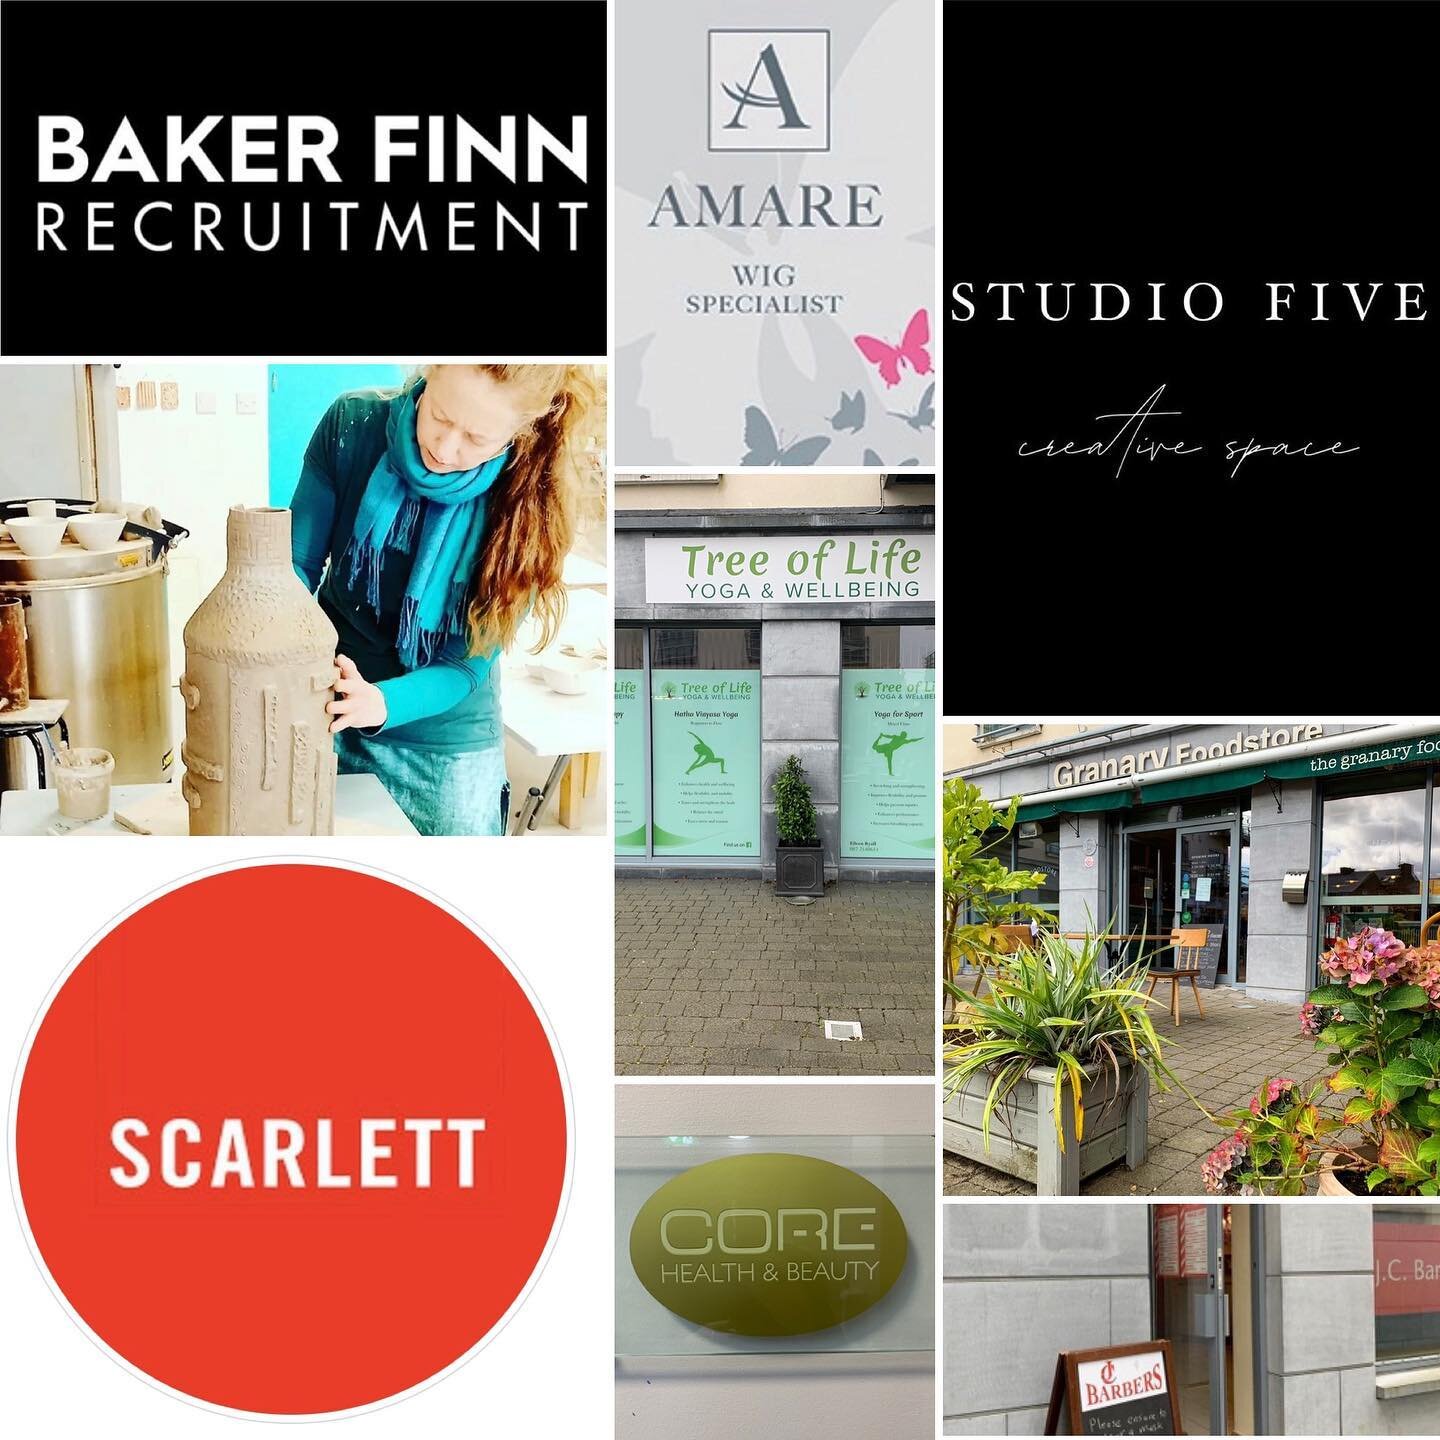 The Square Midleton - boutiques, craft , photography , yoga studio, cafe &amp; foodstore, barbers , health &amp; beauty , wigs and recruitment . We have it all here &hellip; quality locally owned shops all in one one place .. 
@amare_wigs 
@baker_fin